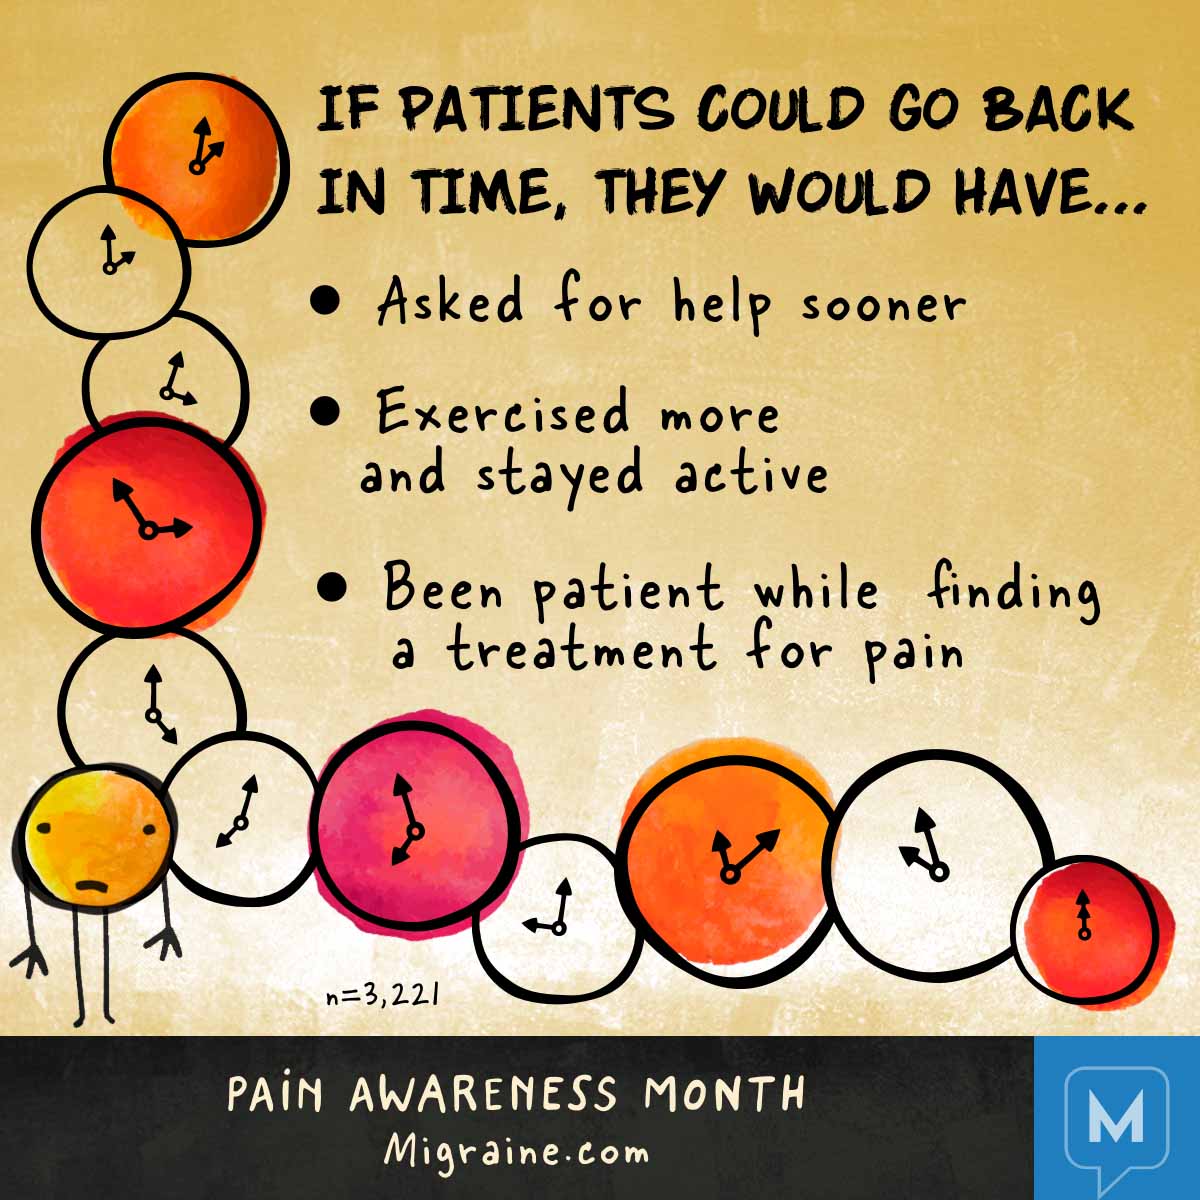 People with pain wish that they had asked for help, stayed active, and been patient with treatment